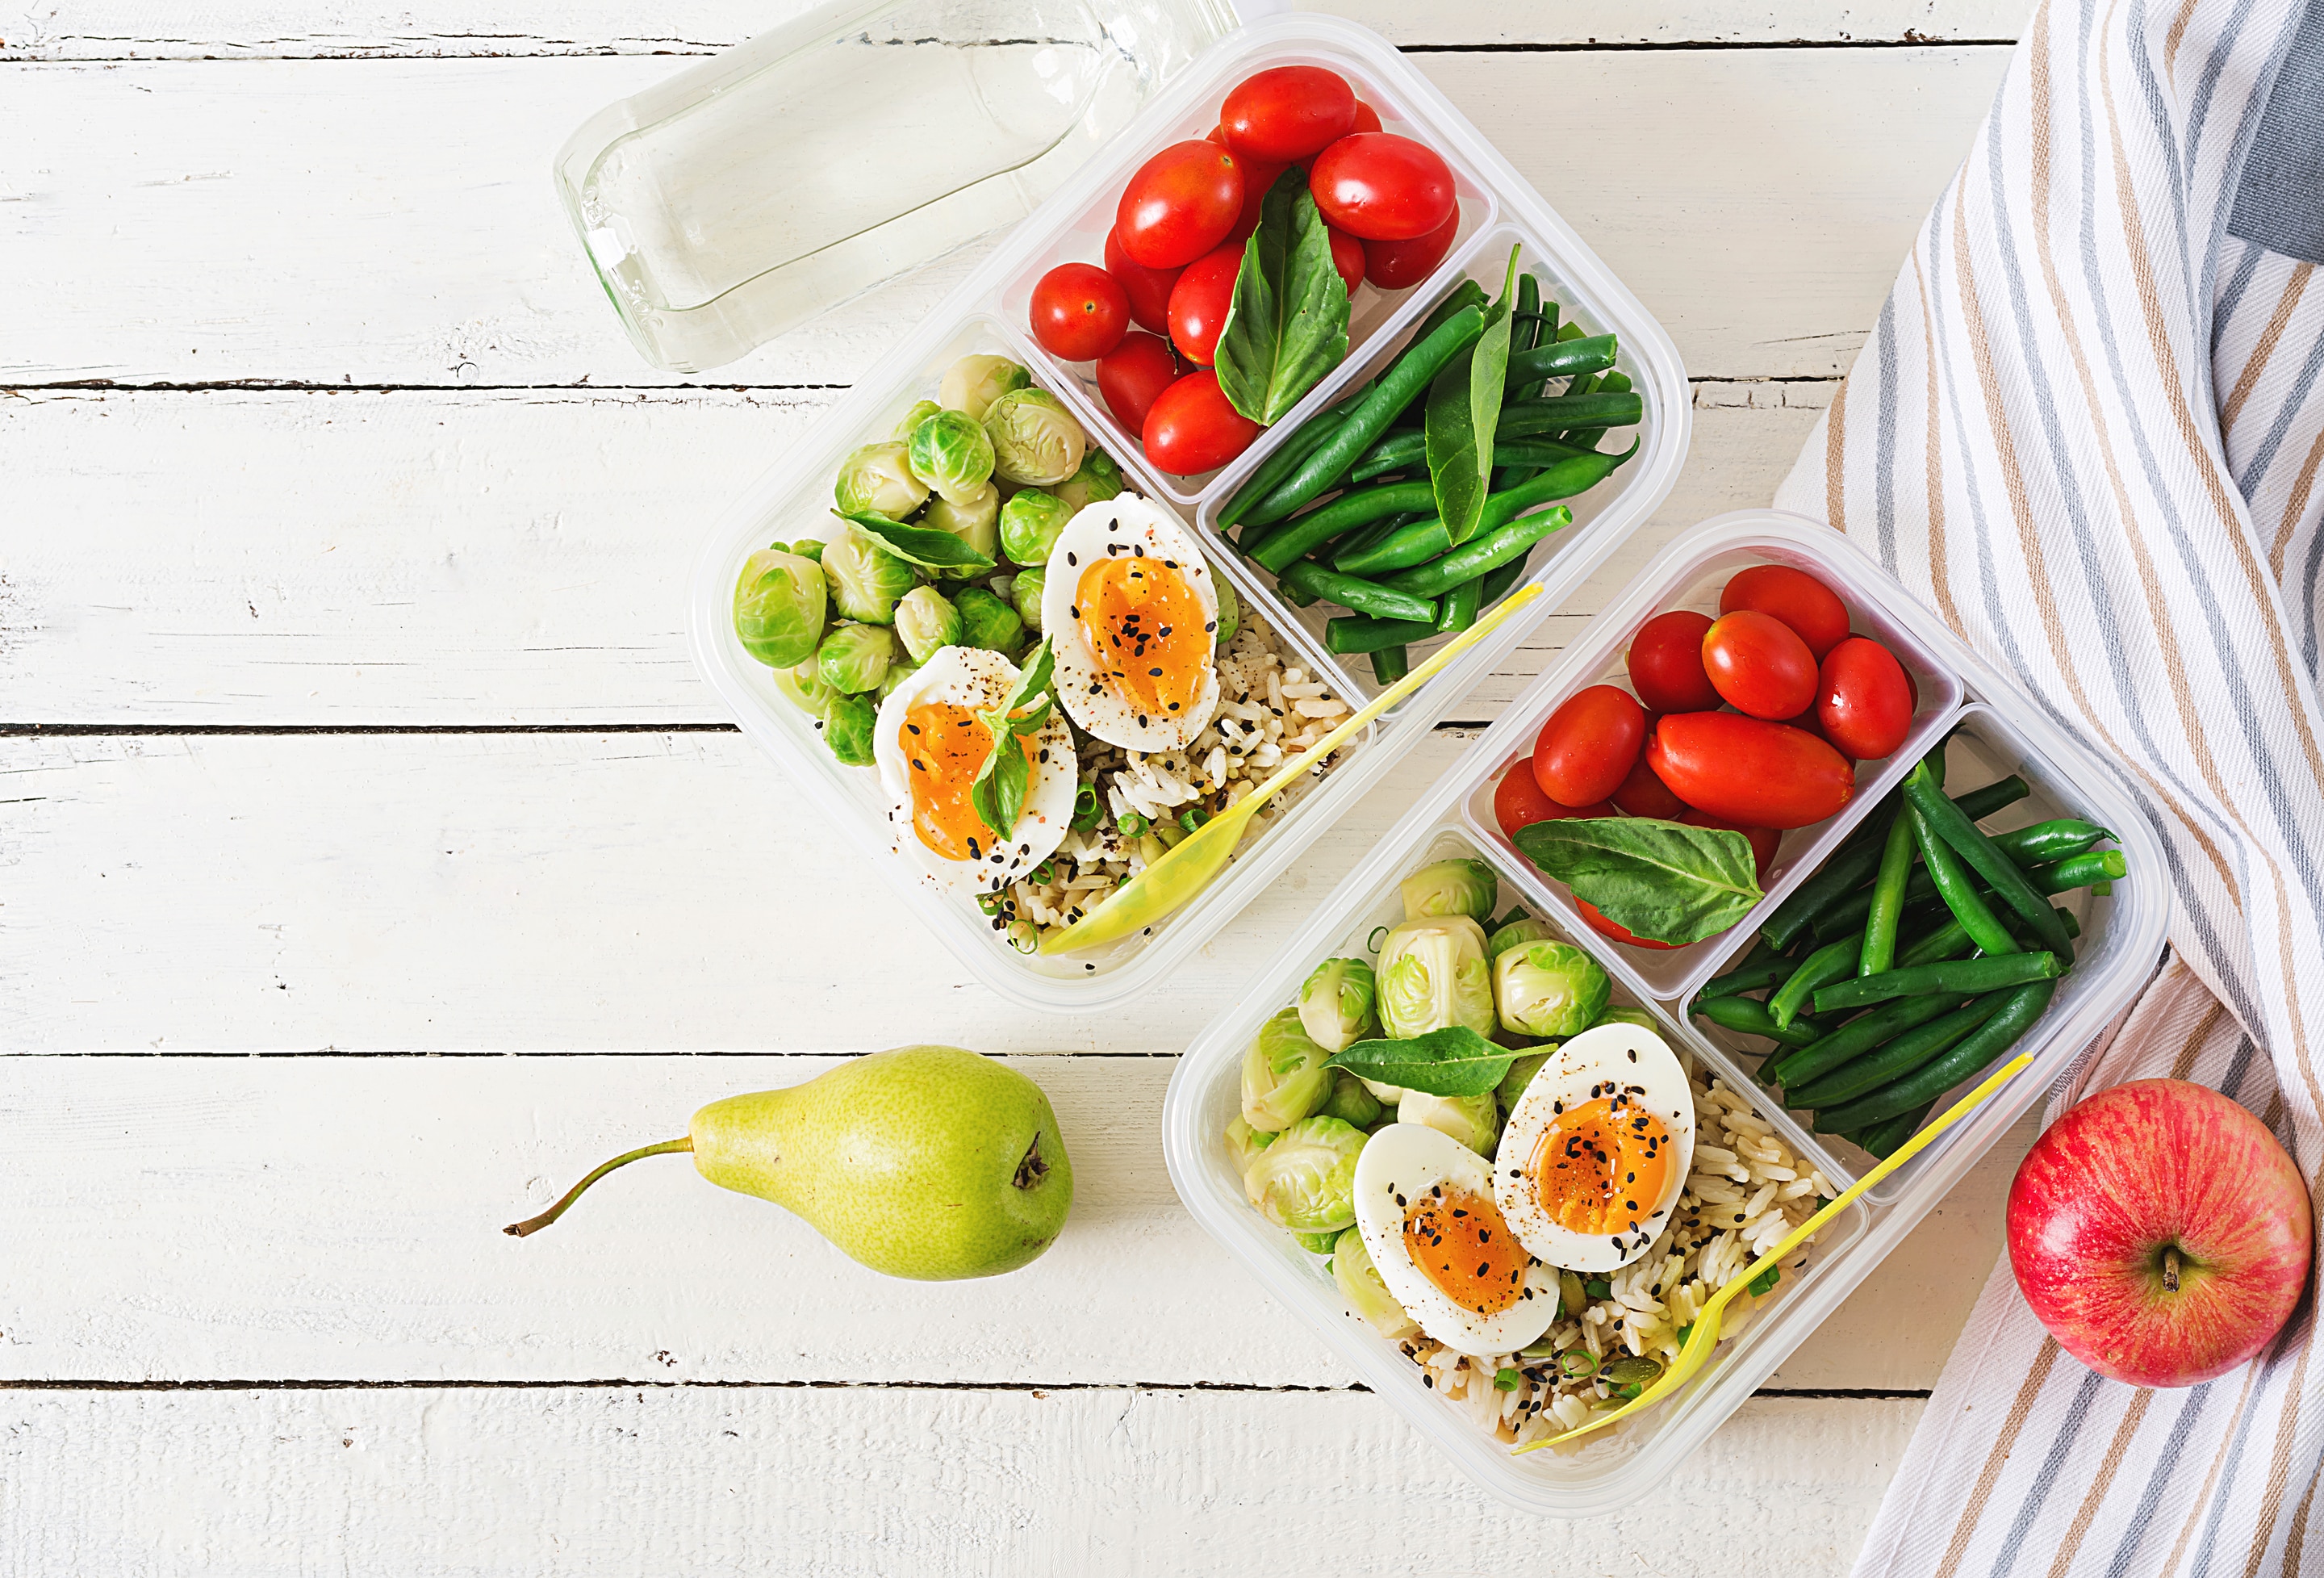 beans, plum tomatoes, sprouts and boiled eggs in a lunch box with pear and apple on the side